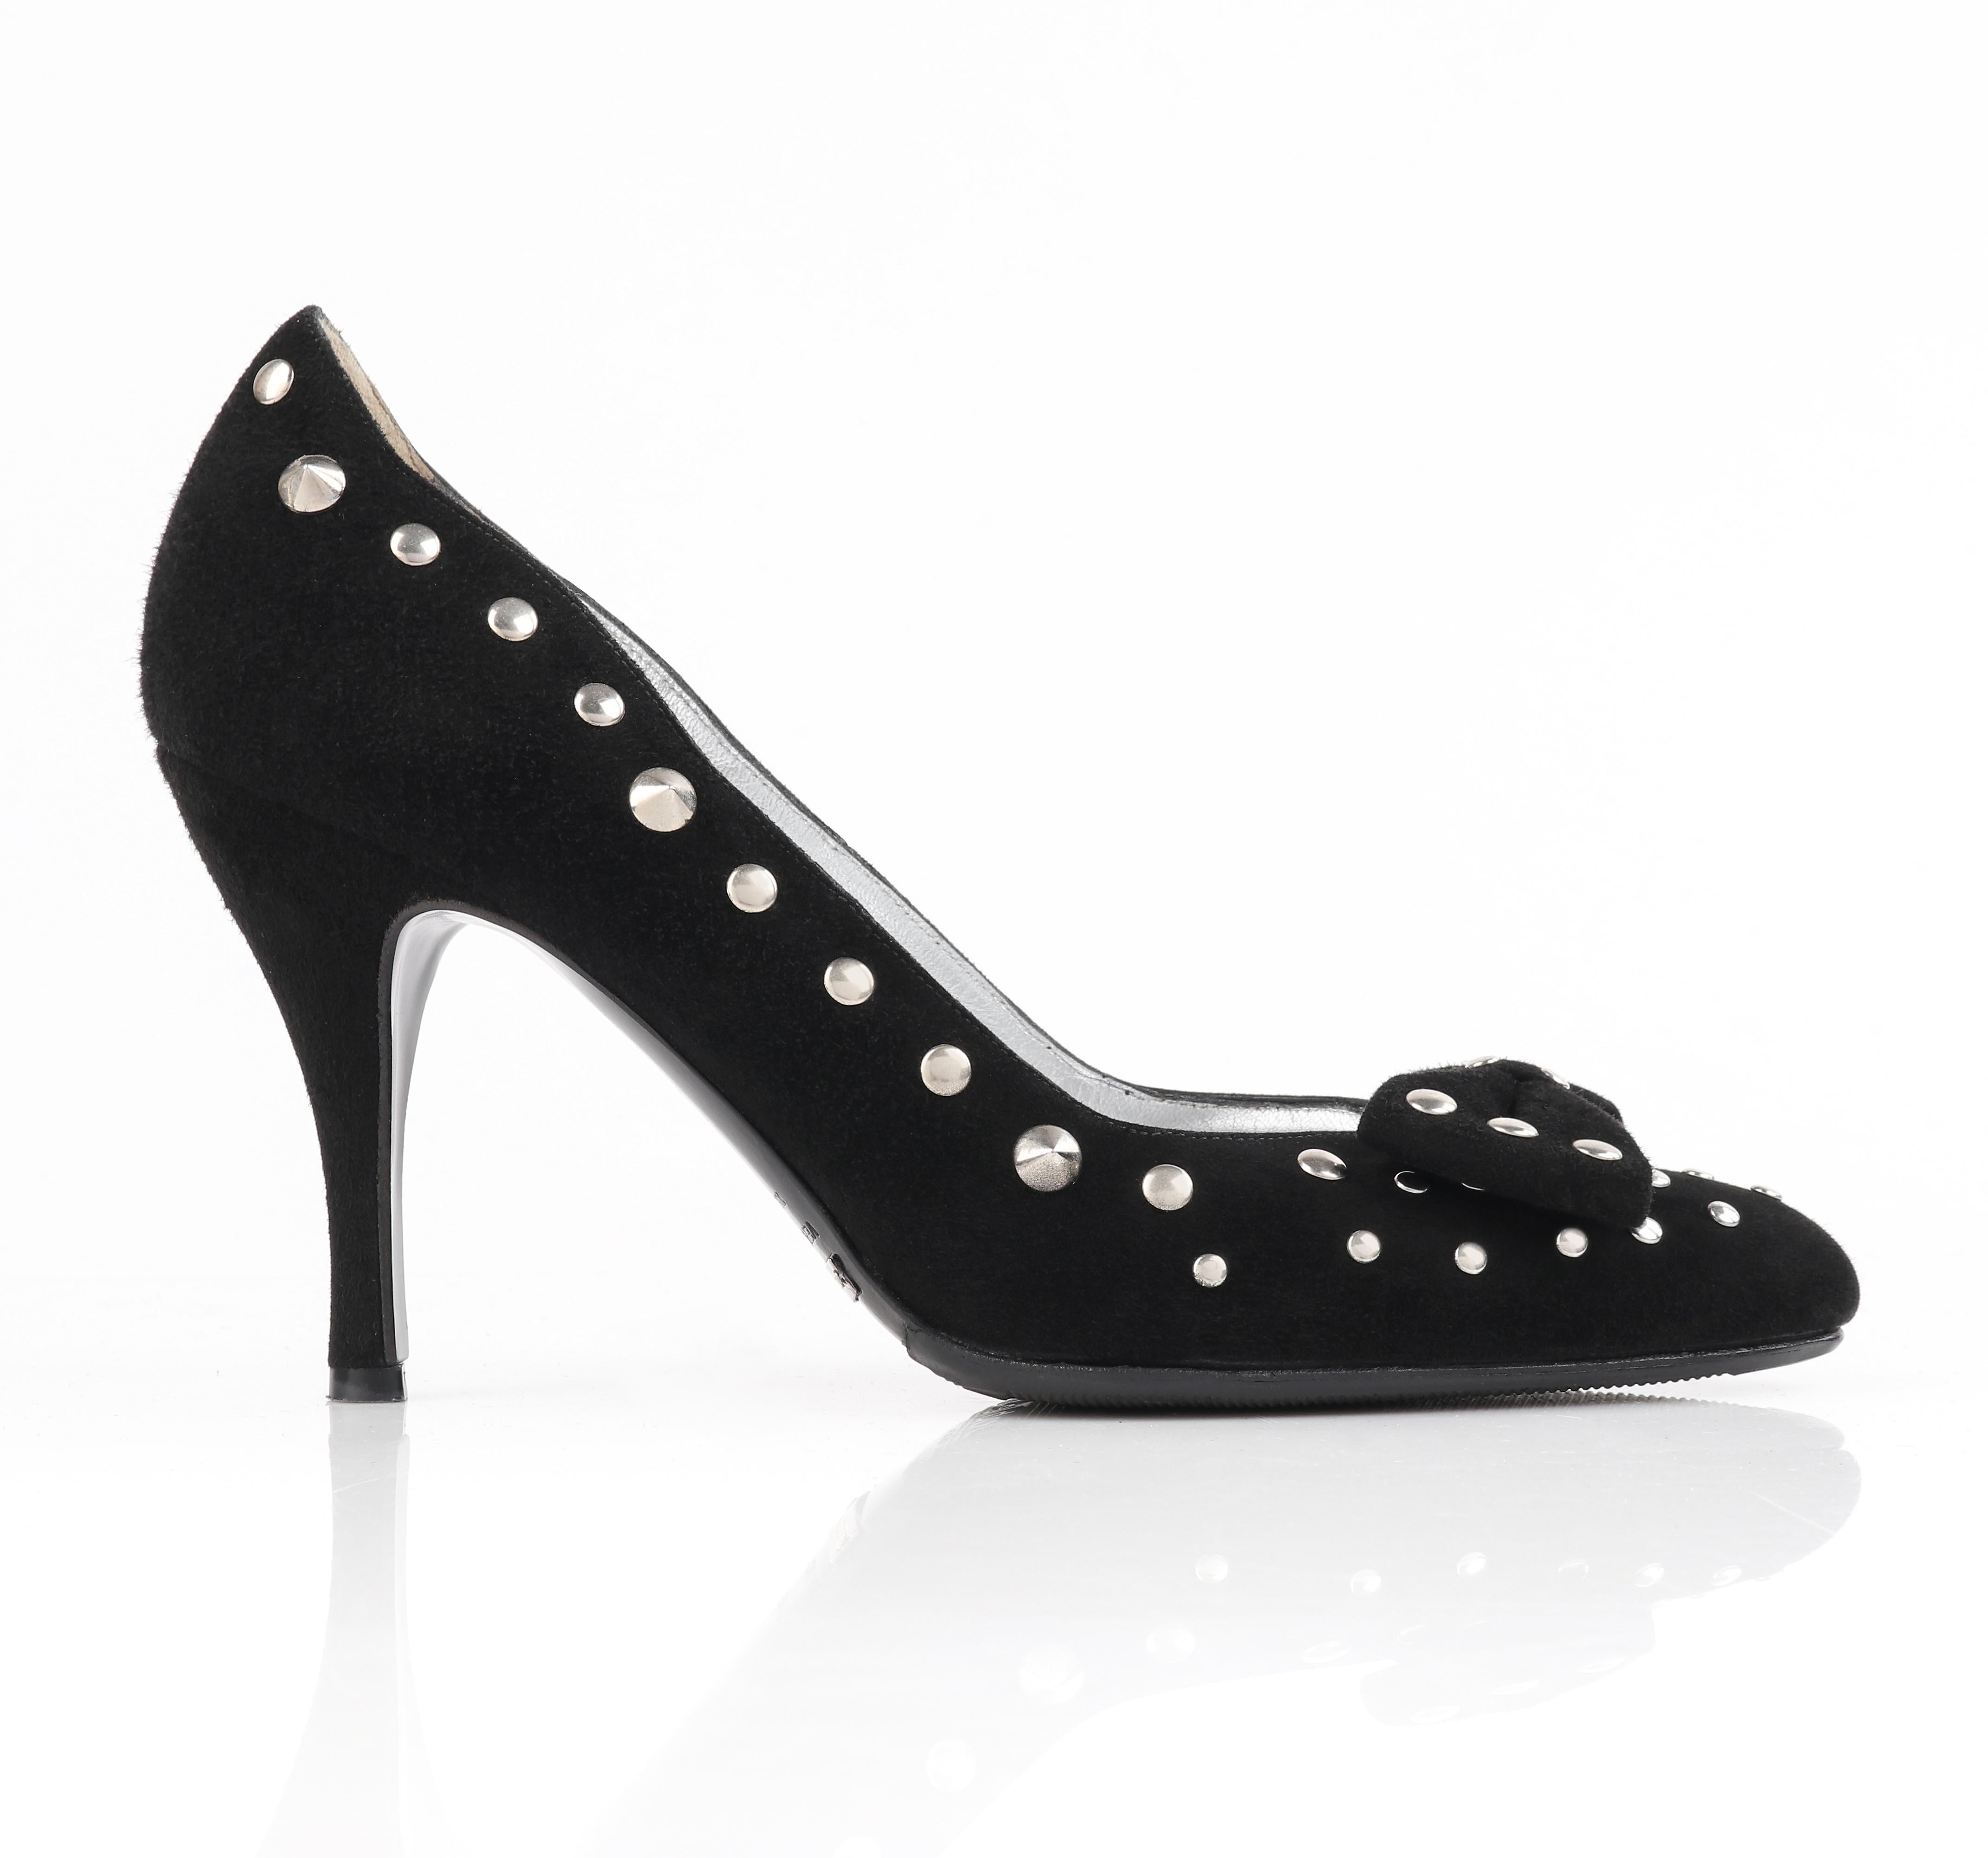 DOLCE & GABBANA Black Suede Silver Studded Vamp Bow Almond Toe Pumps Heels

Estimated Retail: $495.00
 
Brand / Manufacturer: Dolce & Gabbana
Style: Pump / heel
Color(s): Black; silver (interior, studs)
Lined: Yes
Unmarked Fabric Content: Suede